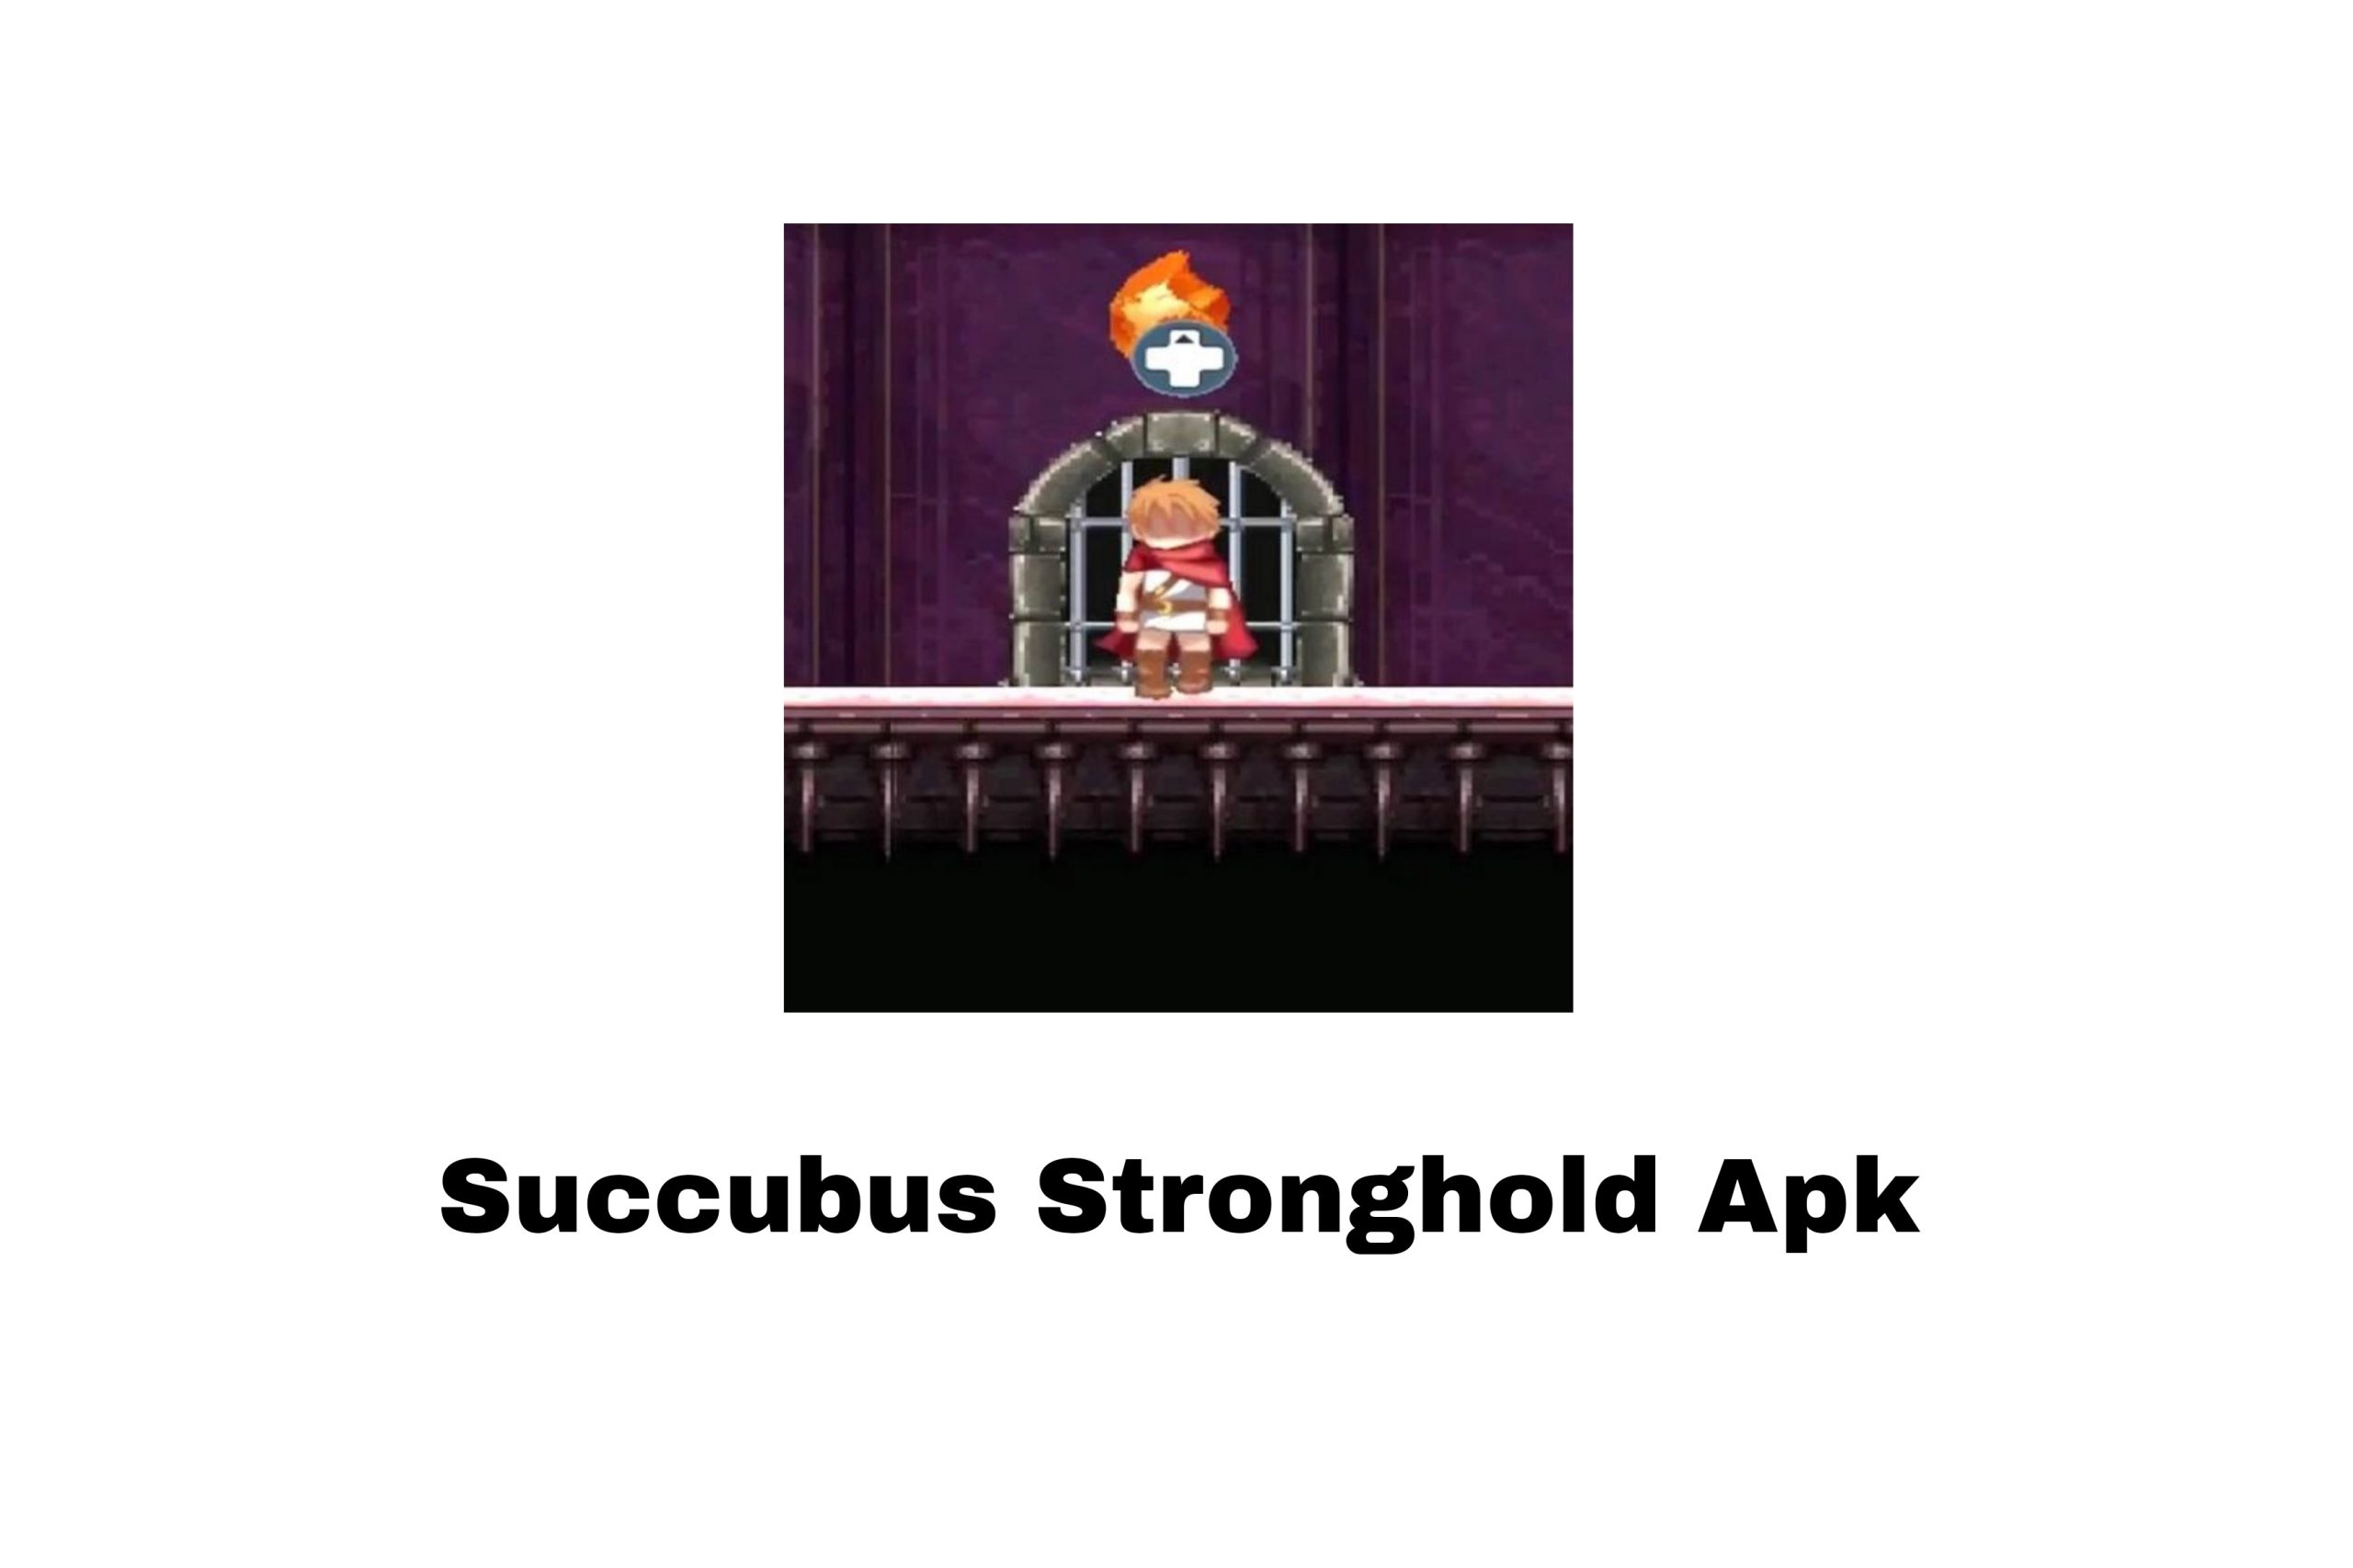 Succubus Stronghold Apk